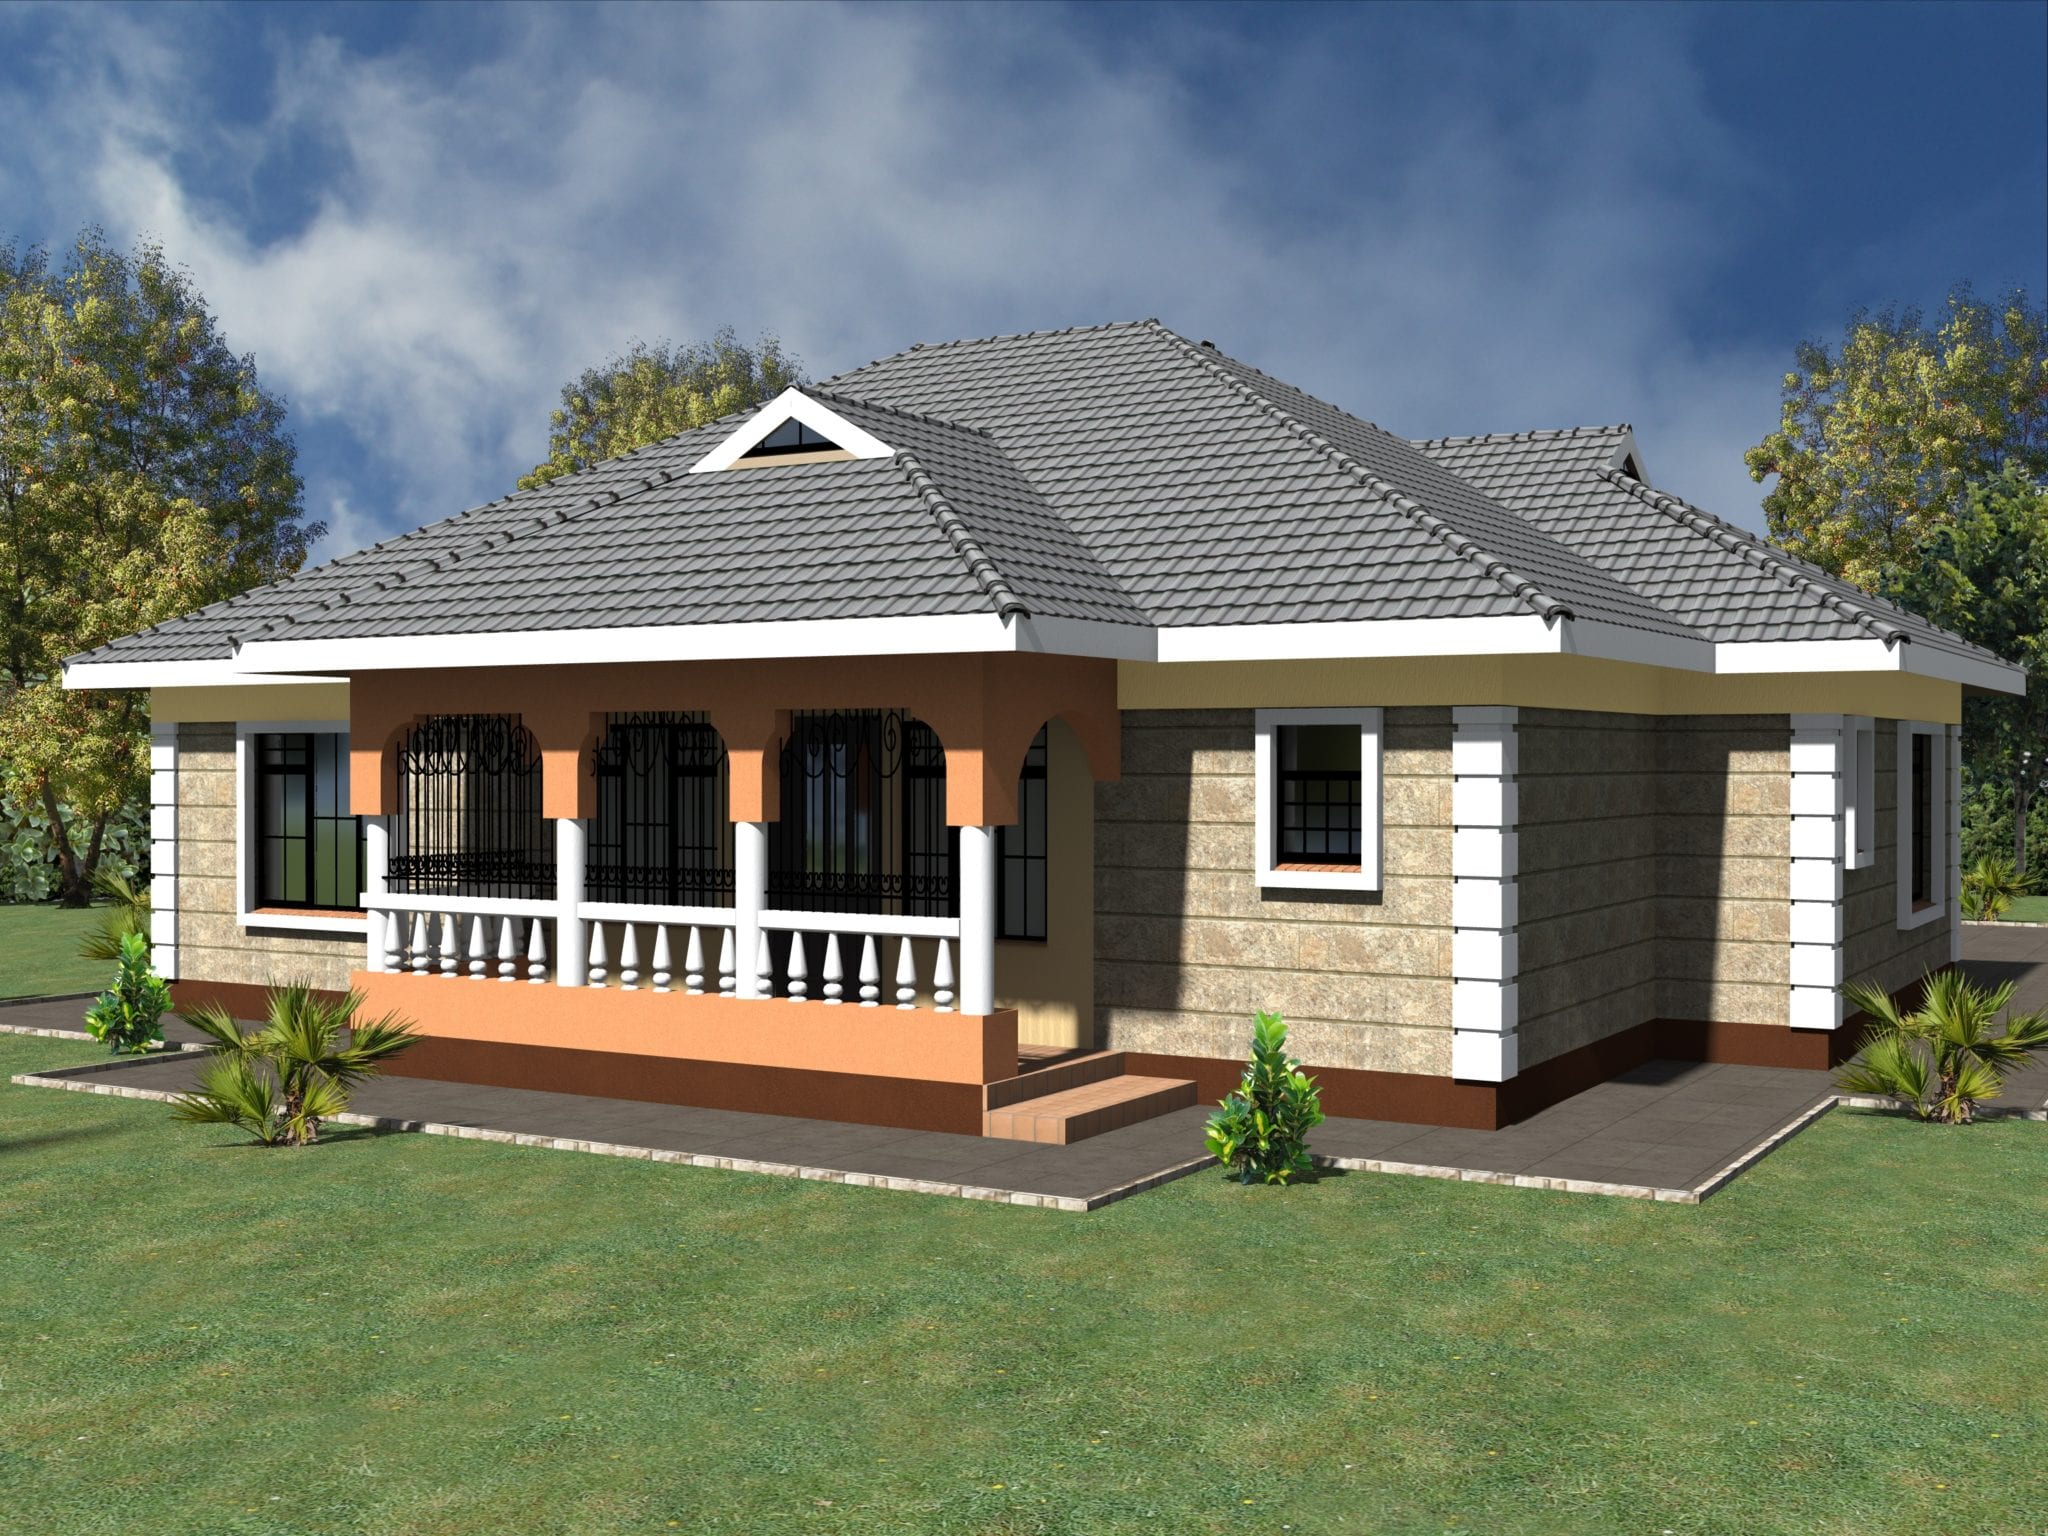 Simple 3 Bedroom House Plans Without Garage Hpd Consult,Small Bathroom Latest Bath Designs